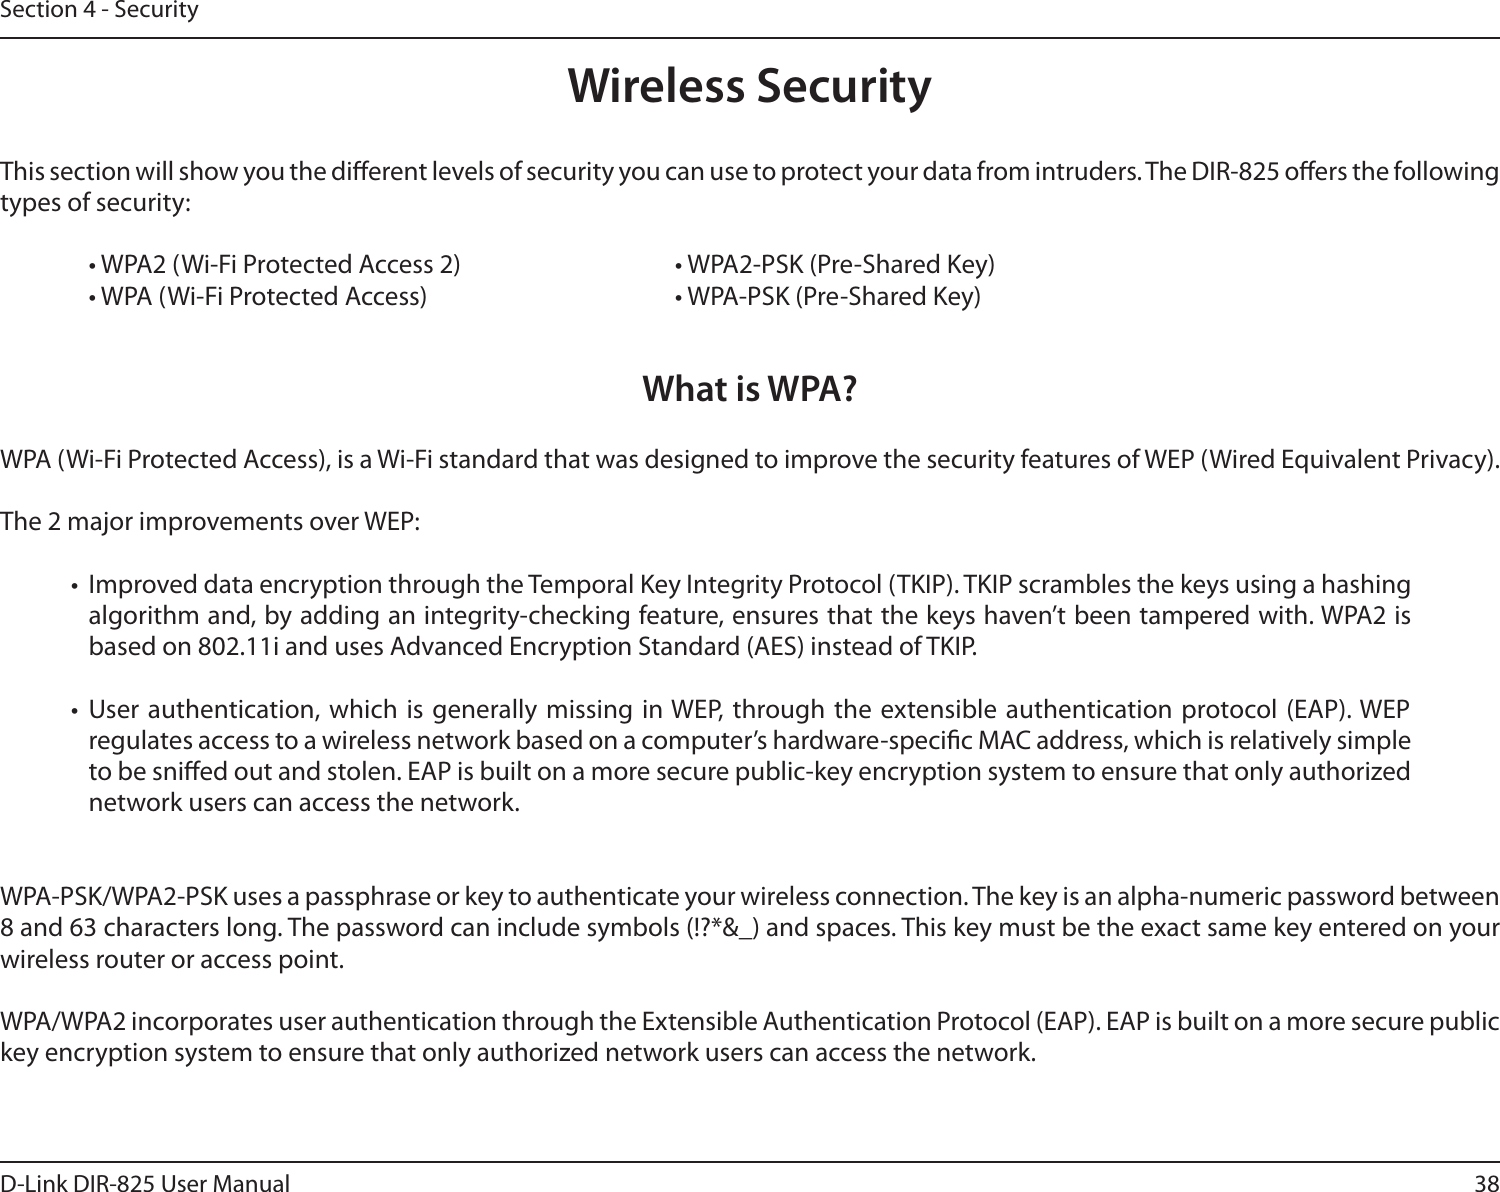 38D-Link DIR-825 User ManualSection 4 - SecurityWireless SecurityThis section will show you the dierent levels of security you can use to protect your data from intruders. The DIR-825 oers the following types of security:  • WPA2 (Wi-Fi Protected Access 2)       • WPA2-PSK (Pre-Shared Key)  • WPA (Wi-Fi Protected Access)        • WPA-PSK (Pre-Shared Key)What is WPA?WPA (Wi-Fi Protected Access), is a Wi-Fi standard that was designed to improve the security features of WEP (Wired Equivalent Privacy).  The 2 major improvements over WEP: •  Improved data encryption through the Temporal Key Integrity Protocol (TKIP). TKIP scrambles the keys using a hashing algorithm and, by adding an integrity-checking feature, ensures that the keys haven’t been tampered with. WPA2 is based on 802.11i and uses Advanced Encryption Standard (AES) instead of TKIP.•  User authentication, which is generally missing in WEP, through the extensible authentication protocol (EAP). WEP regulates access to a wireless network based on a computer’s hardware-specic MAC address, which is relatively simple to be snied out and stolen. EAP is built on a more secure public-key encryption system to ensure that only authorized network users can access the network.WPA-PSK/WPA2-PSK uses a passphrase or key to authenticate your wireless connection. The key is an alpha-numeric password between 8 and 63 characters long. The password can include symbols (!?*&amp;_) and spaces. This key must be the exact same key entered on your wireless router or access point.WPA/WPA2 incorporates user authentication through the Extensible Authentication Protocol (EAP). EAP is built on a more secure public key encryption system to ensure that only authorized network users can access the network.